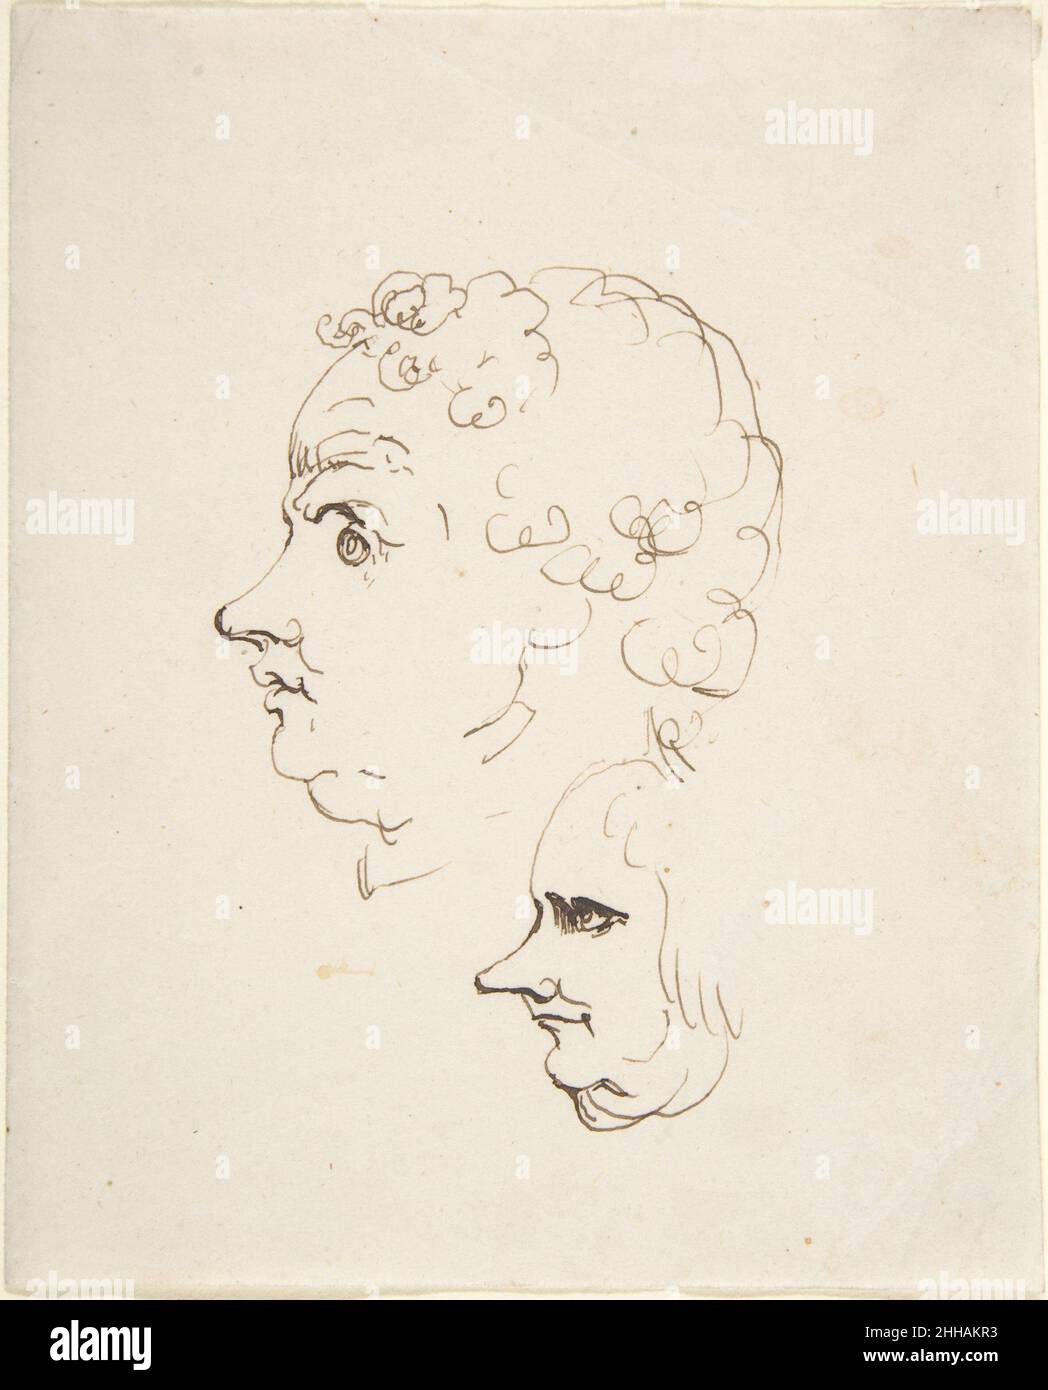 Two Caricature Heads of Men after 1794 Johann Heinrich Wilhelm Tischbein German. Two Caricature Heads of Men  383922 Artist: Johann Heinrich Wilhelm Tischbein, German, Haina 1751?1829 Eutin, Two Caricature Heads of Men, after 1794, Pen and brown ink, sheet: 5 x 4 1/16 in. (12.7 x 10.3 cm) Overall: 5 x 8 1/16 in. (12.7 x 20.5 cm). The Metropolitan Museum of Art, New York. Purchase, Alain and Marie-Christine van den Broek d'Obrenan Gift, 2008 (2008.626.1) Stock Photo